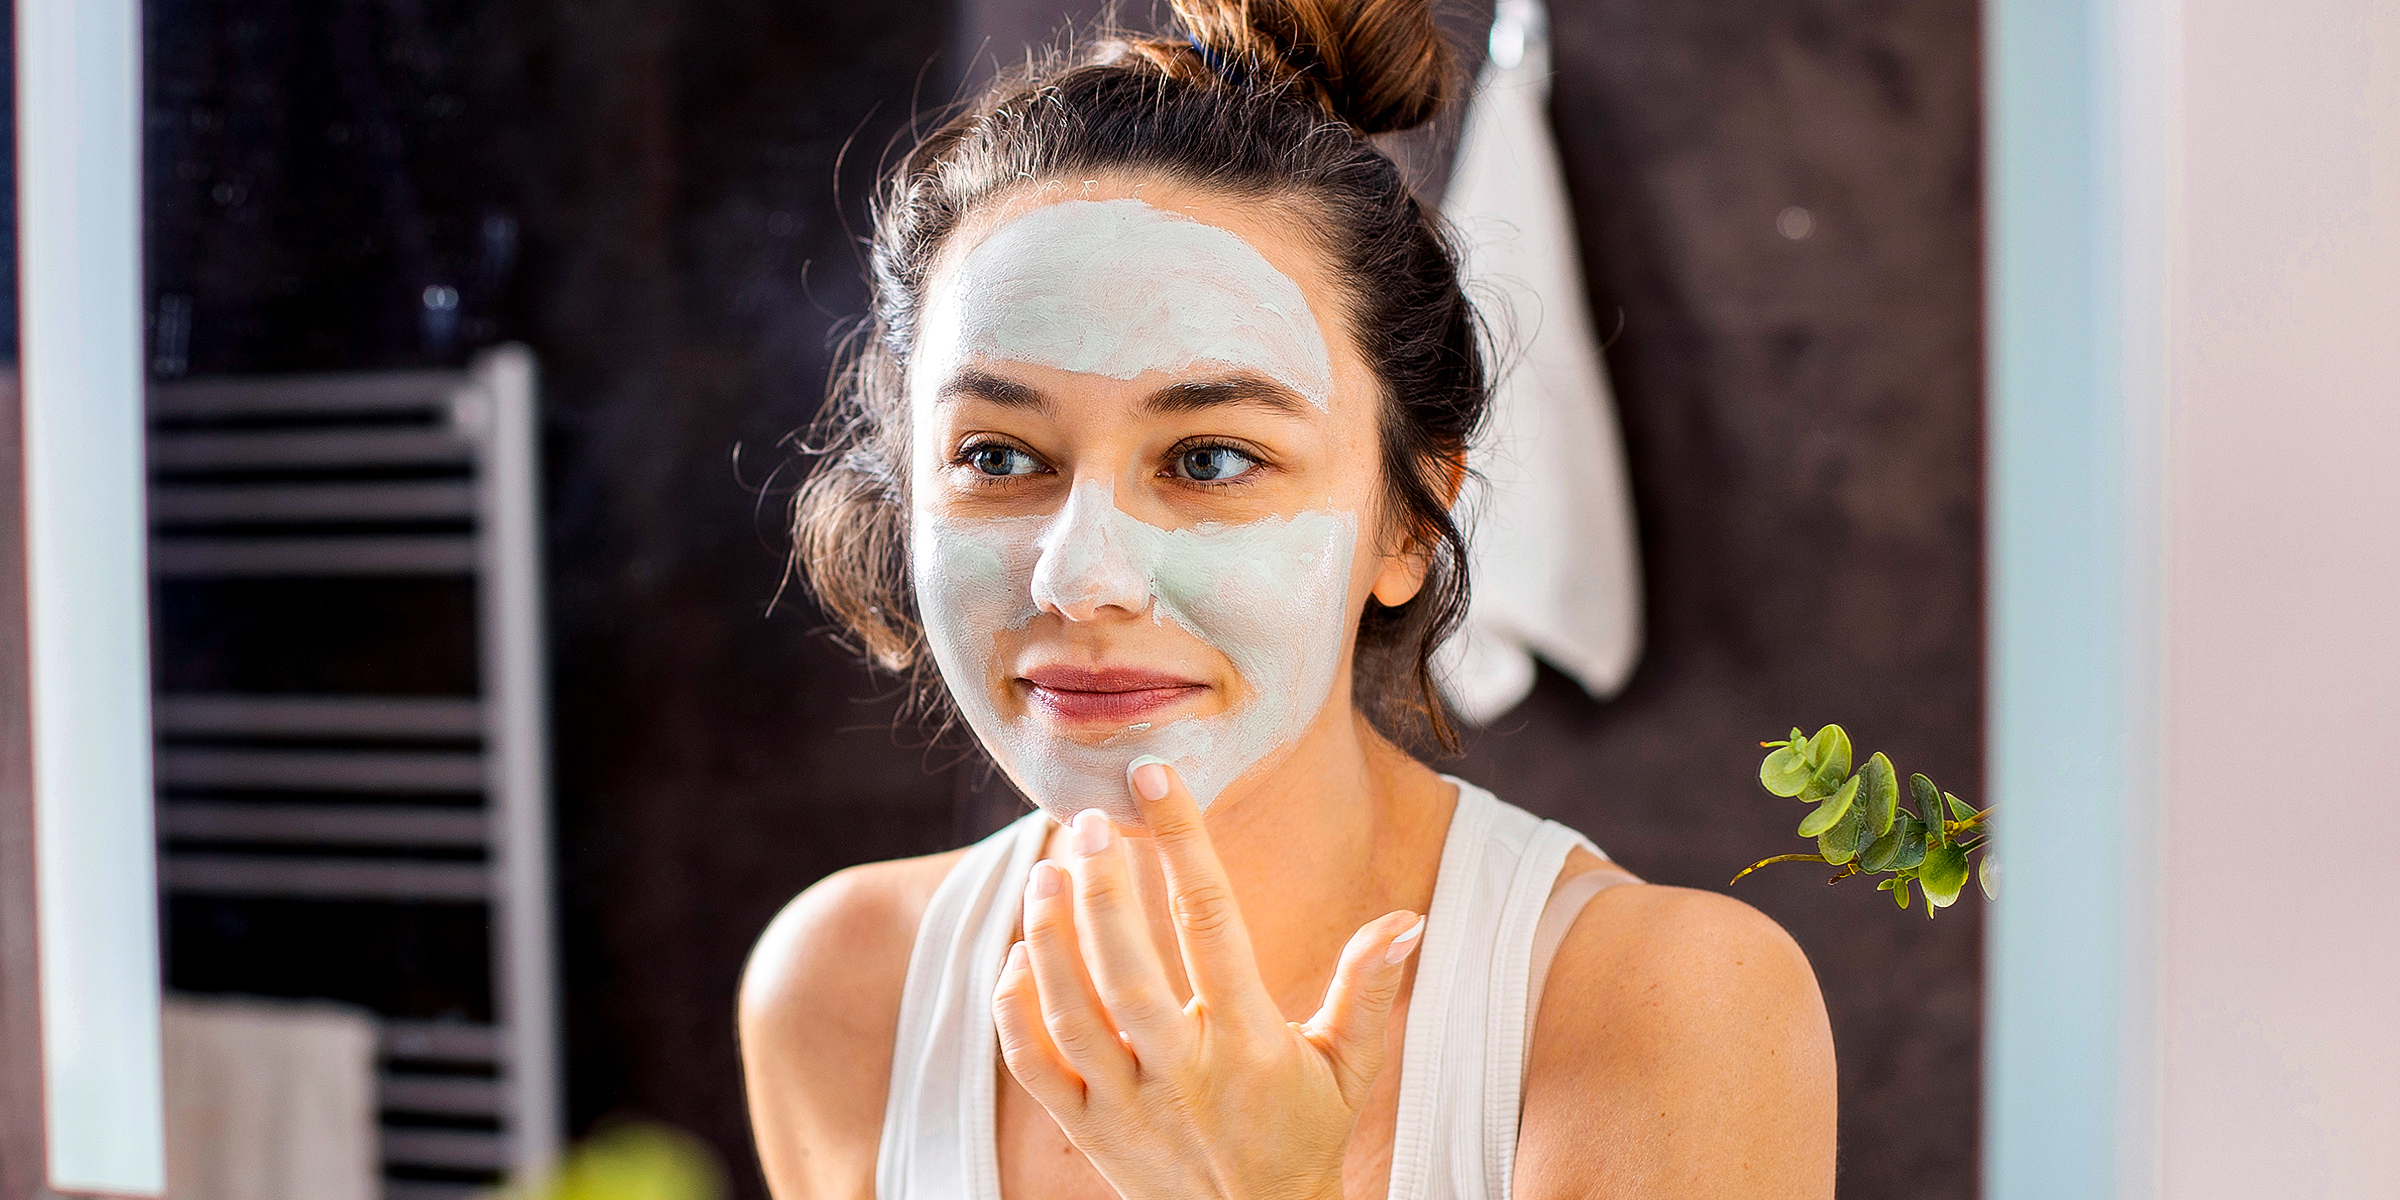 A woman in her 20s doing her skincare routine | Source: Shutterstock